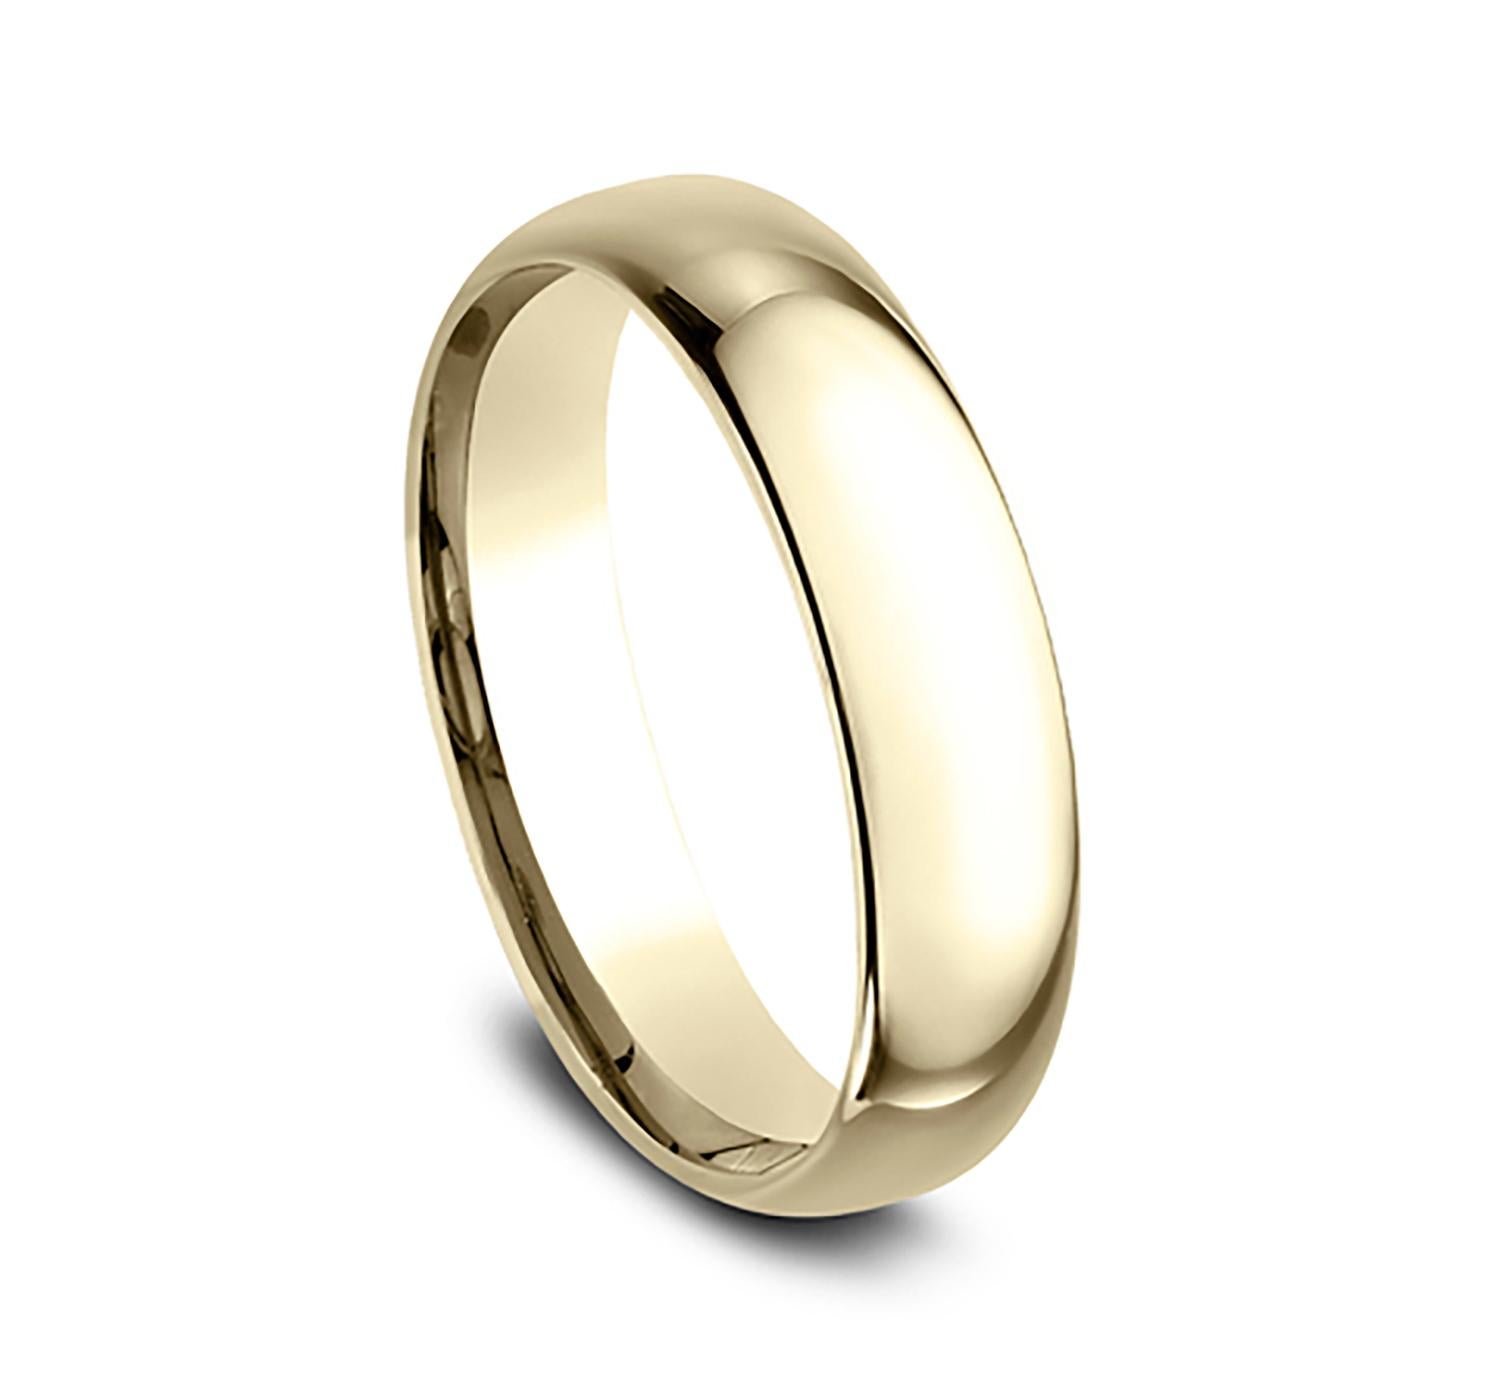 Benchmark wedding band in 14K yellow gold polished finish. Width 5mm, high dome comfort fit. Custom engraving and finishing available. Size 11 US and resizable upon request. Available in 1/4, 1/2, and 3/4 sizes, for more information please message